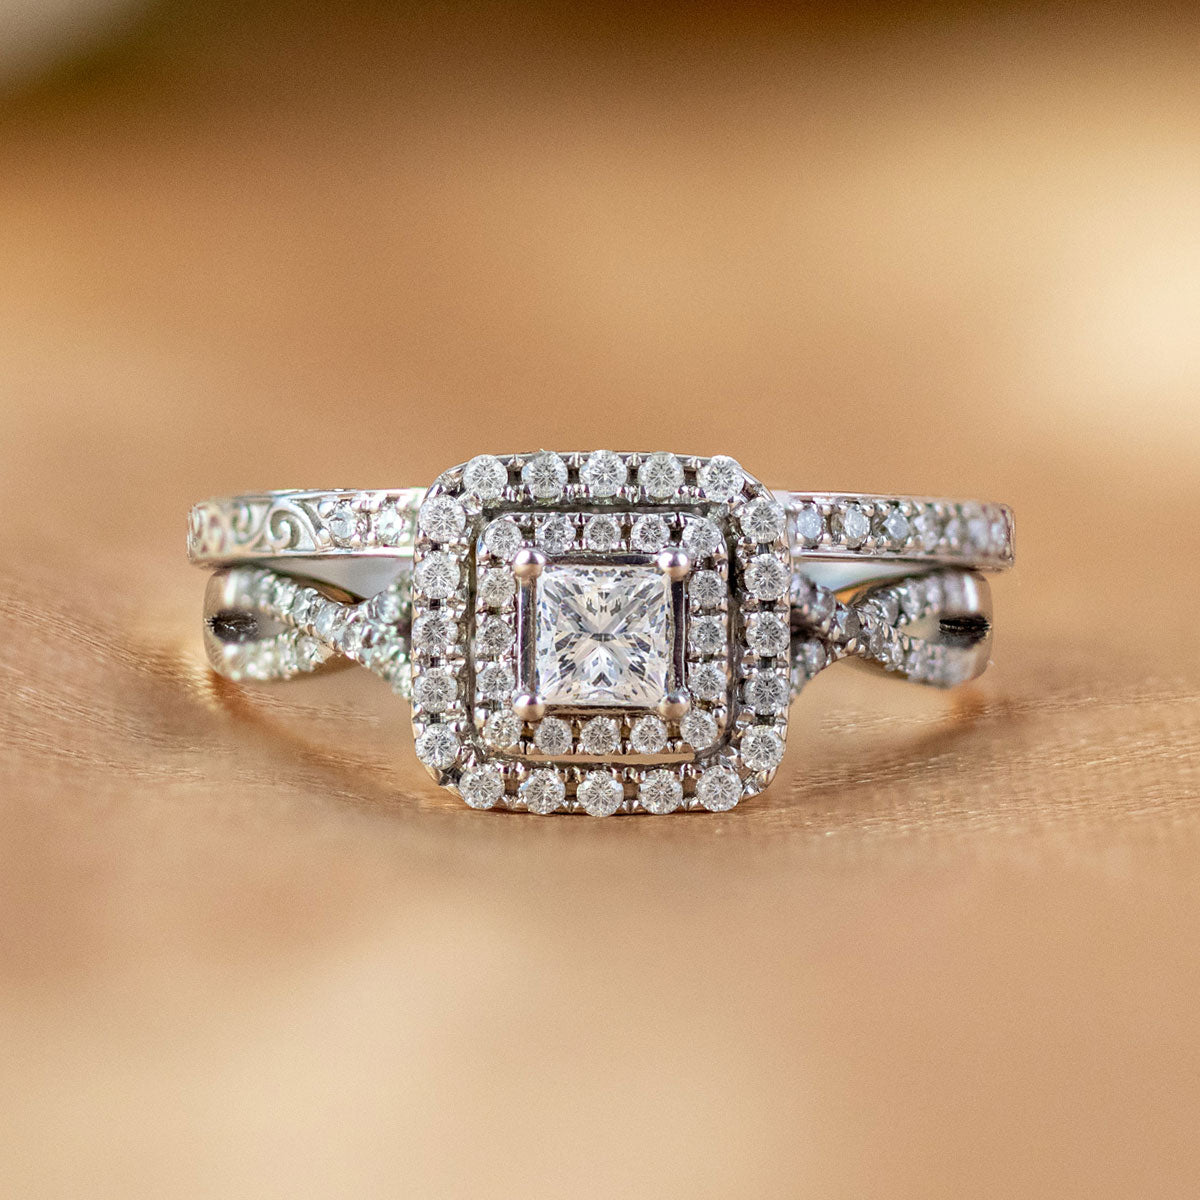 1.25 ct - Square Diamond - Double Halo - Twisted Band - Vintage Inspired -  Pave - Wedding Ring Set in 10K White Gold